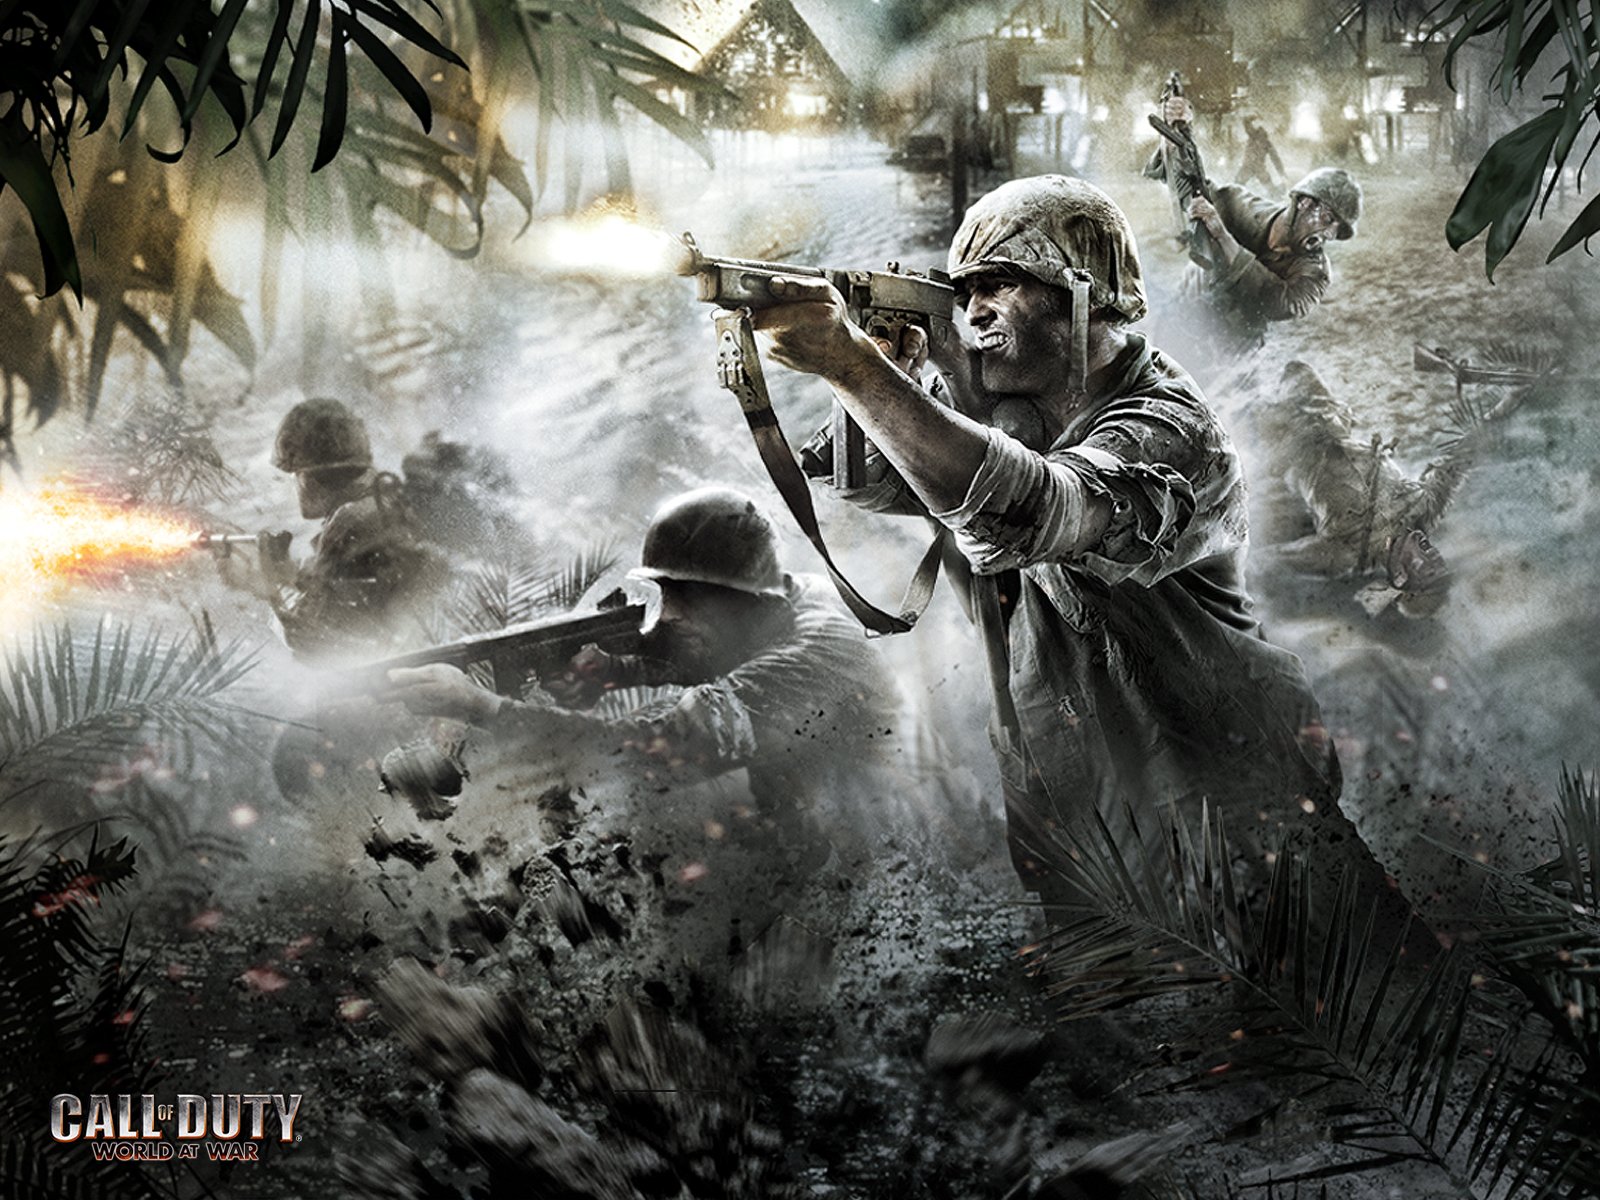 Call Of Duty Wallpaper and Background Image | 1600x1200 | ID:49017